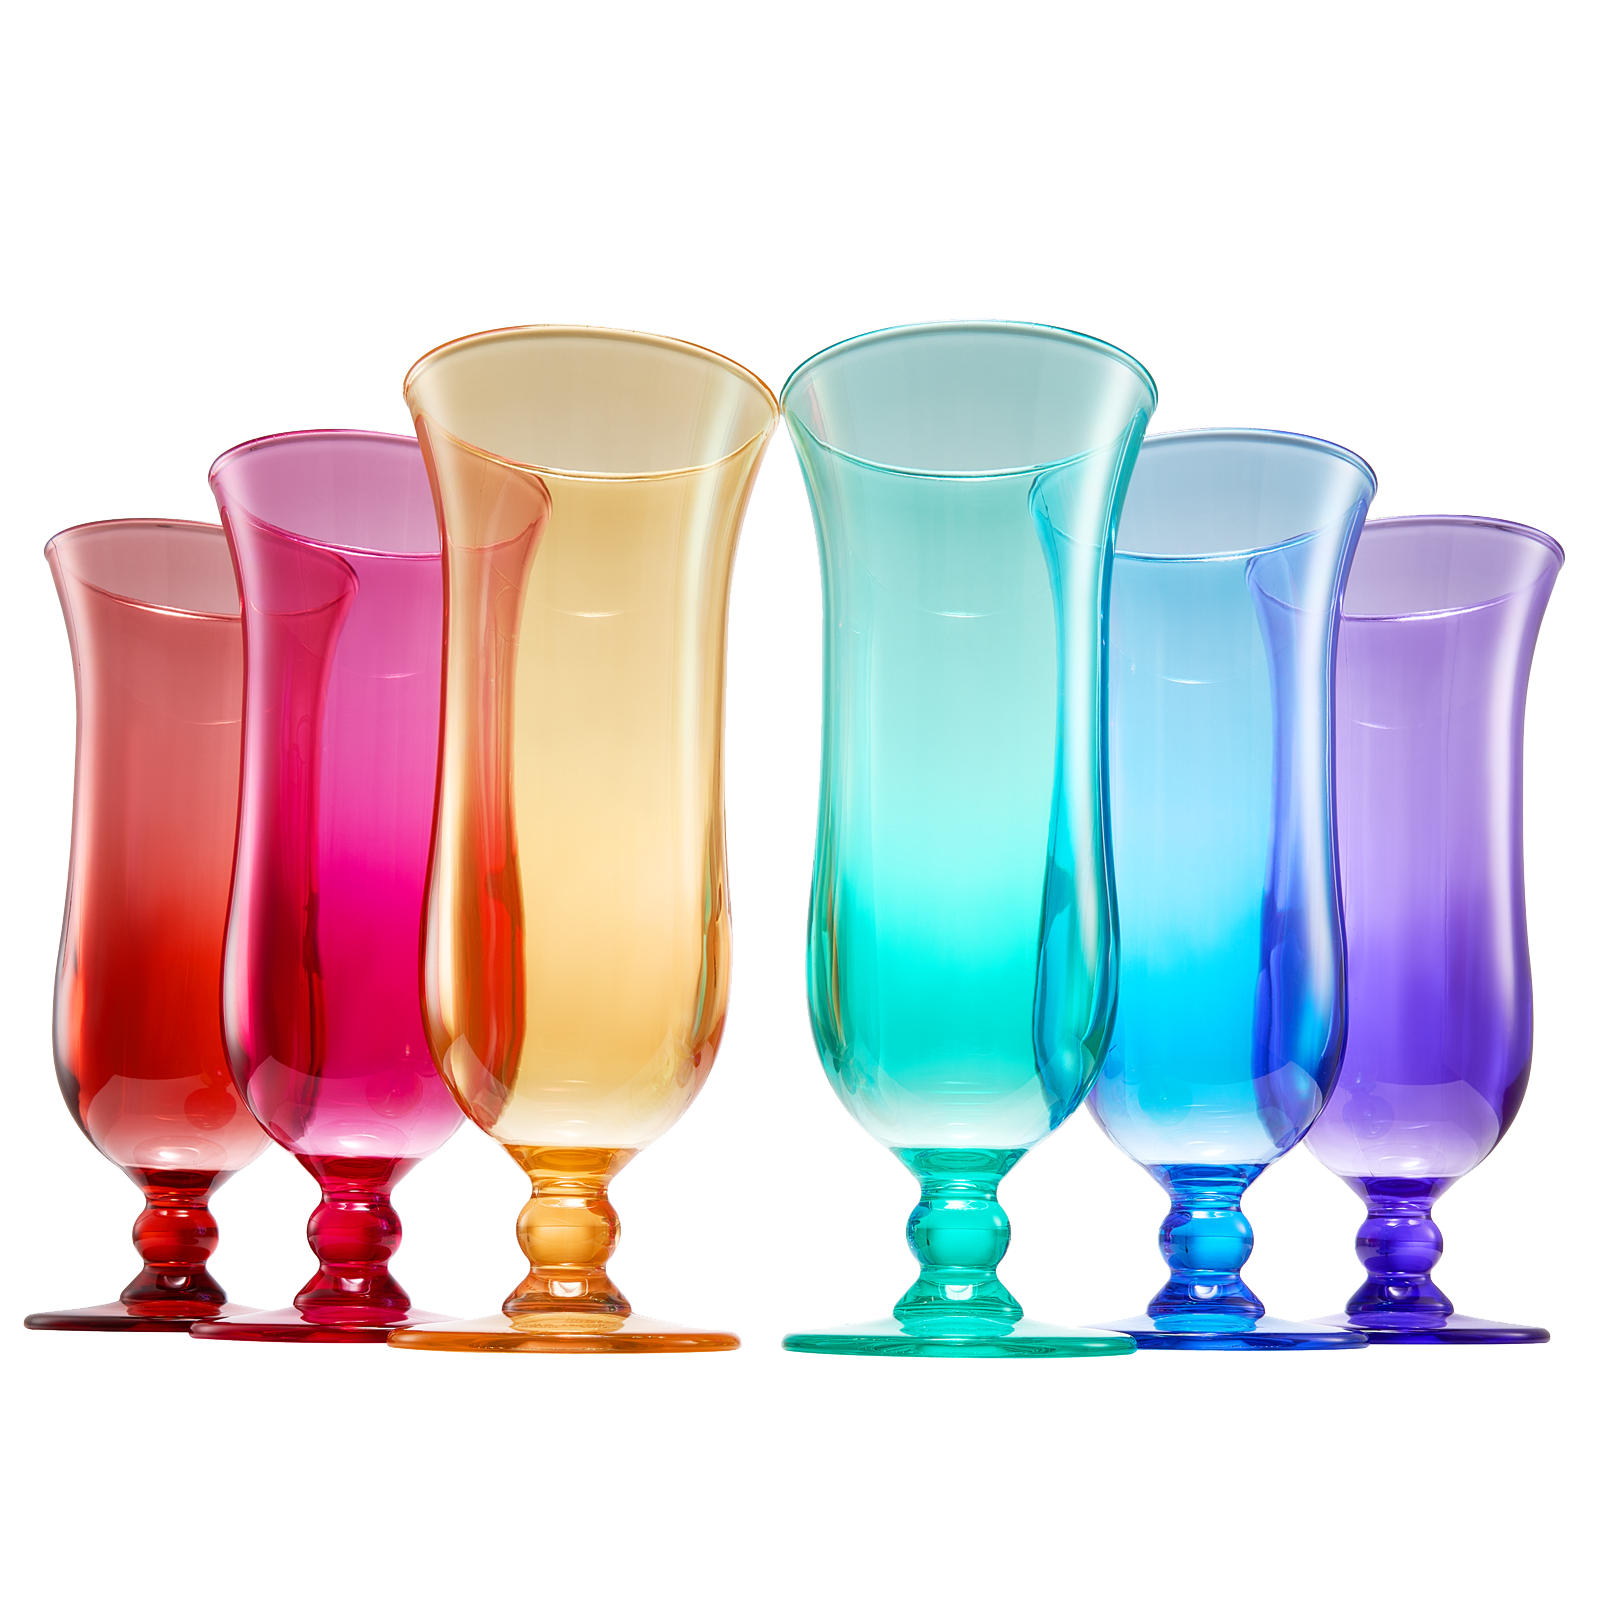 Unbreakable Pastel Color Acrylic Champagne Flutes Glasses, Set of 6